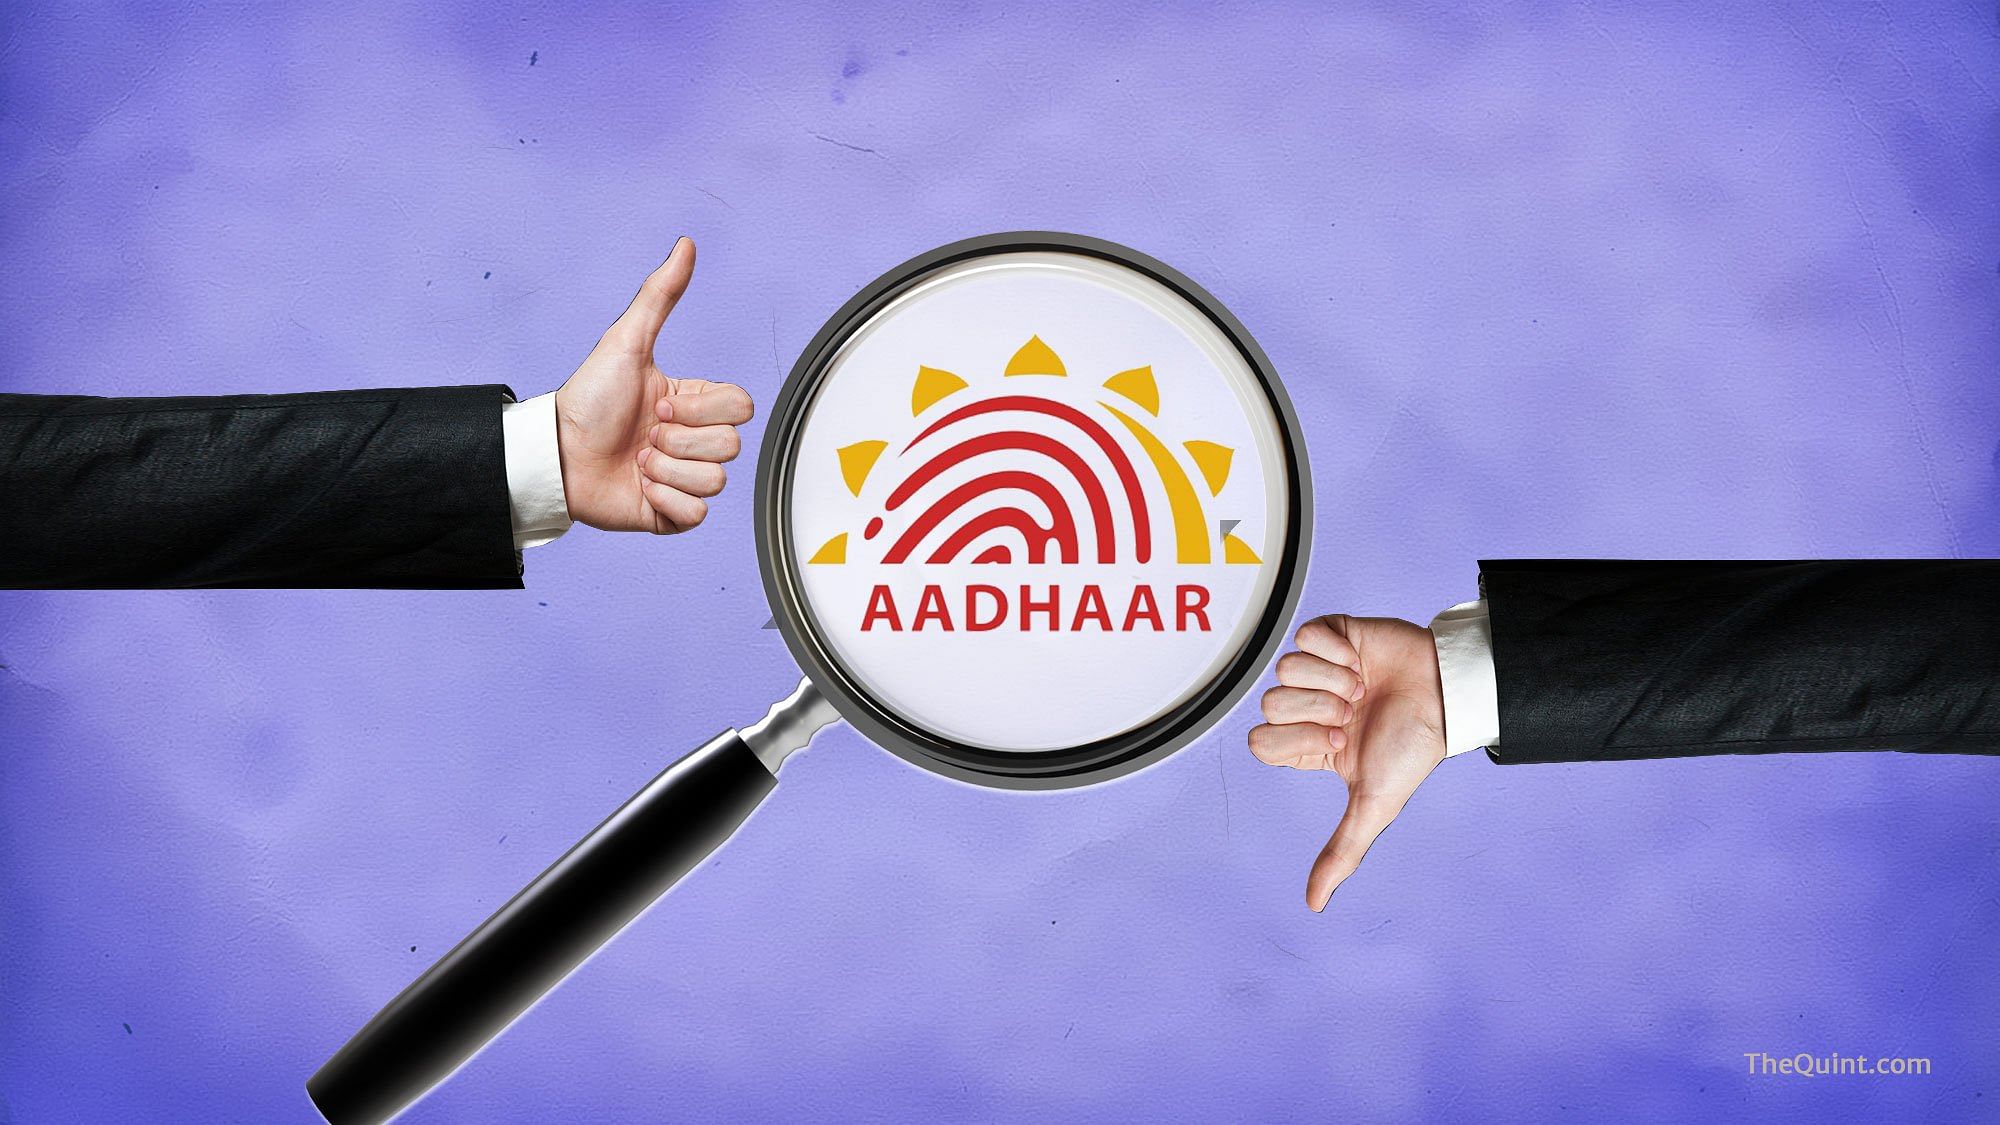 The fate of Aadhaar will be decided by the Supreme Court by the end of November.